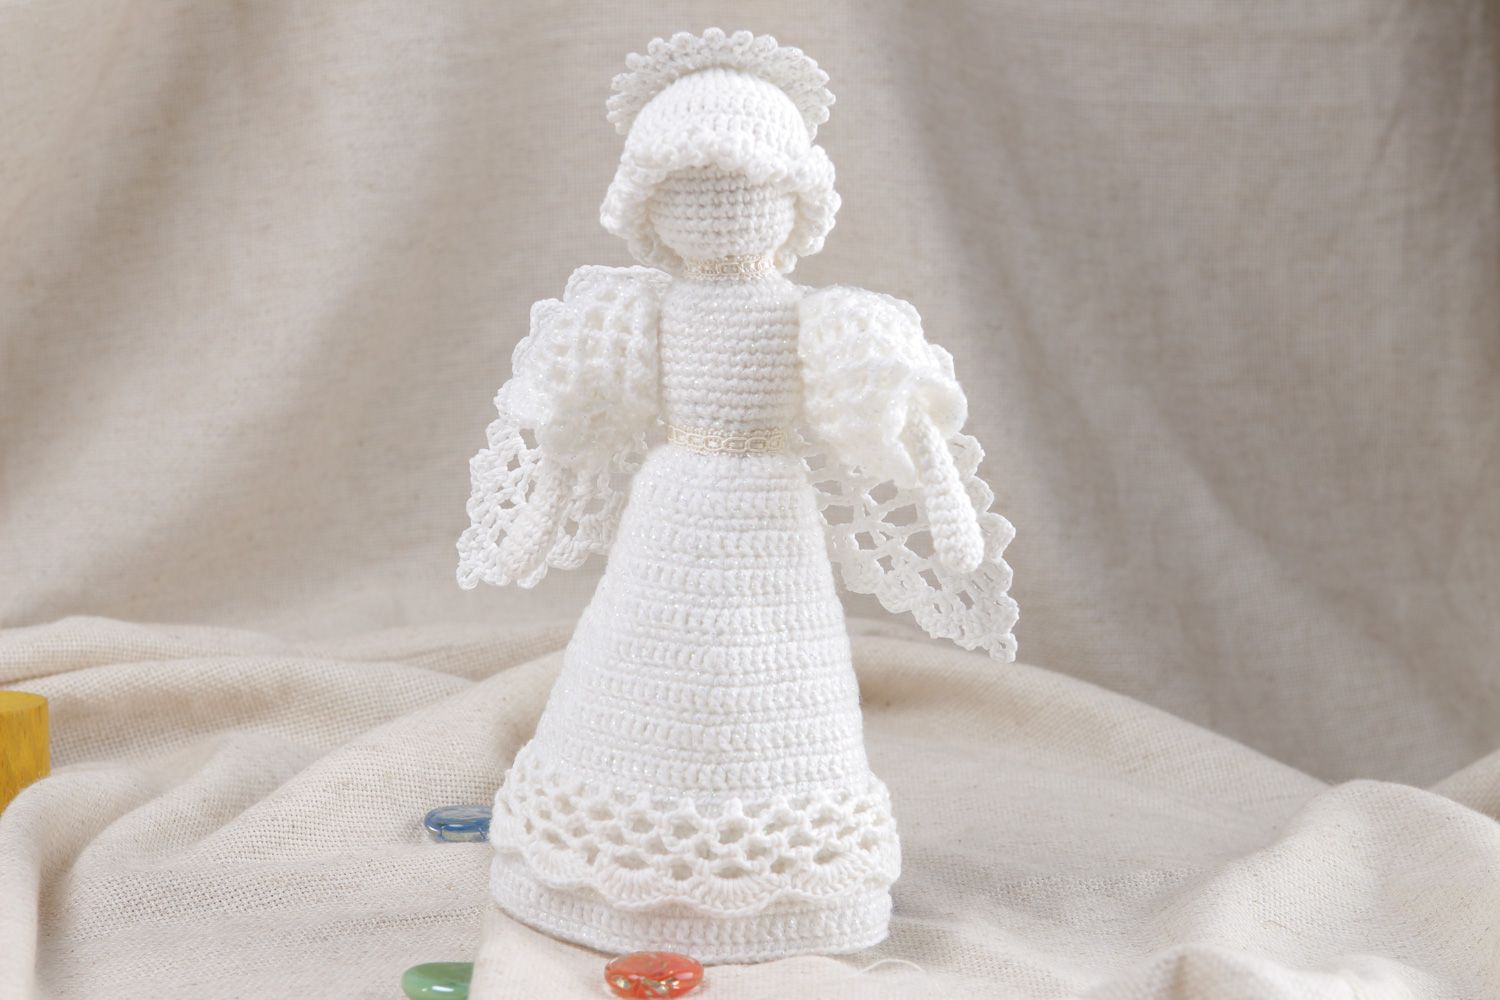 Handmade soft toy crocheted of acrylic and cotton threads snow white angel photo 5